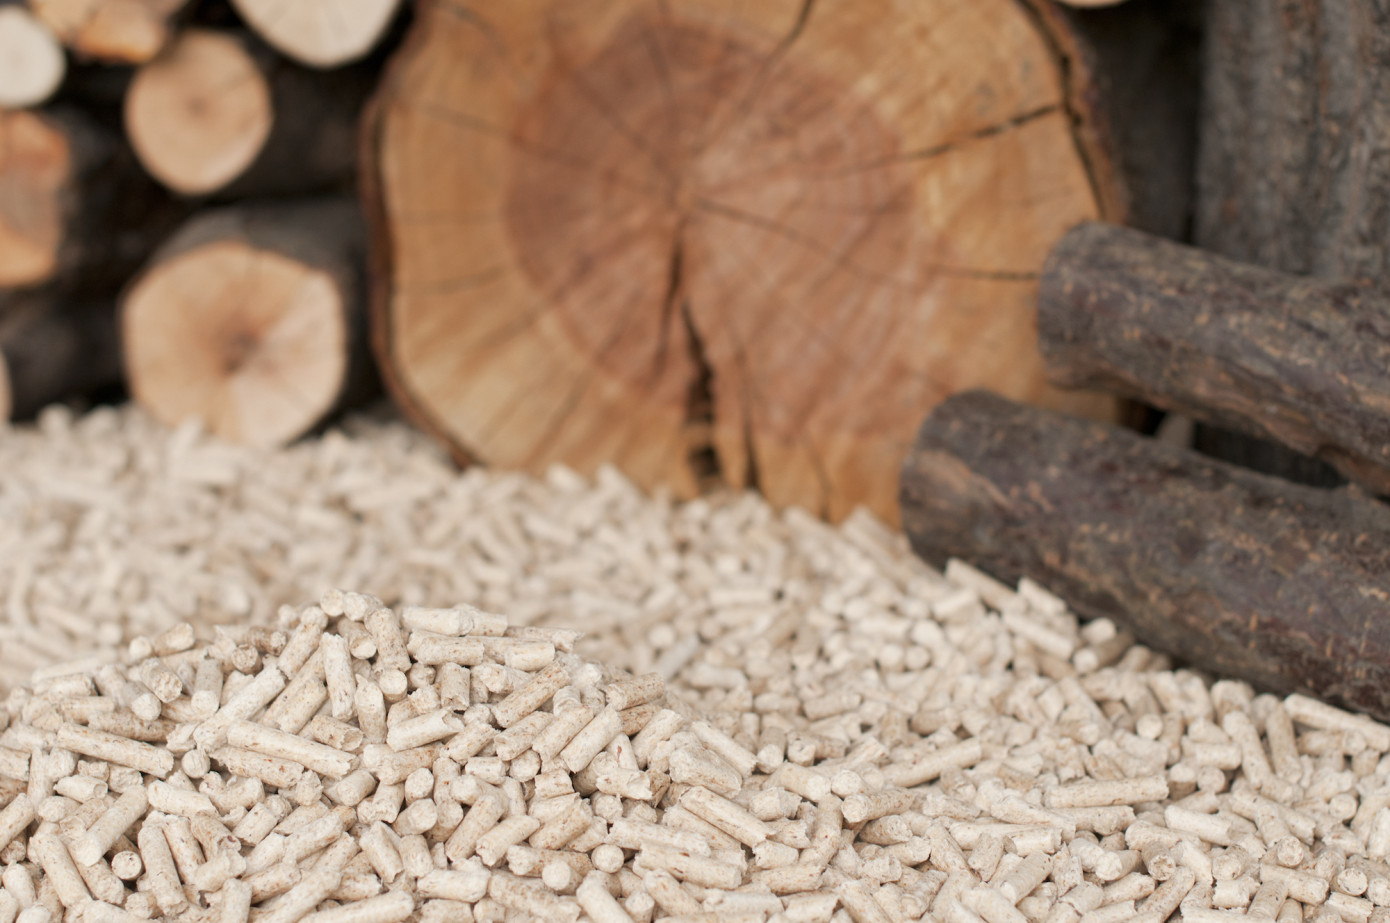 Exports of wood pellets from Vietnam to South Korea grow 49% in May